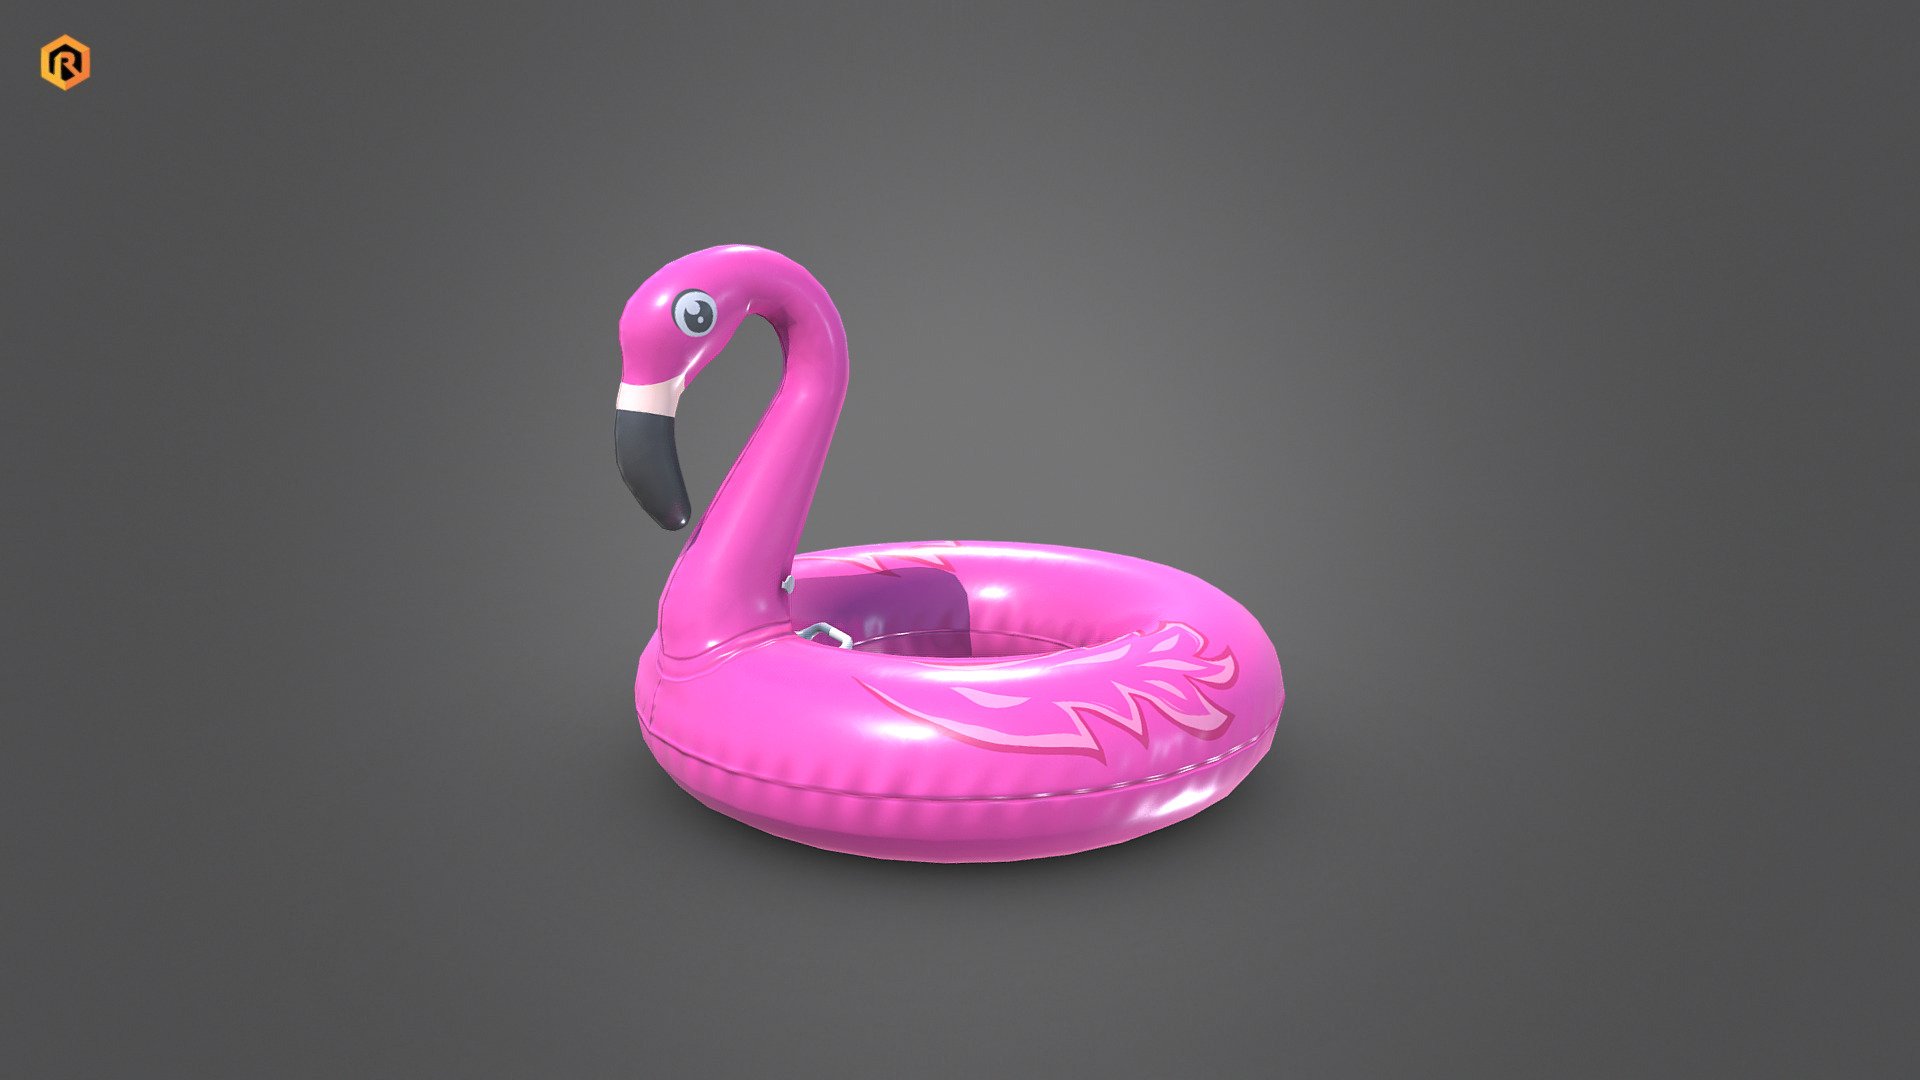 Low-poly PBR 3D model of Inflatable Pink Flamingo.

It is best for use in games and other VR / AR, real-time applications such as Unity or Unreal Engine.

It can also be rendered in Blender or using Vray as the model is equipped with all required PBR textures.  

**This is a PRO edition of this 3D model and includes source files for Substance Painter, 

low &amp; hi-res Blender source files, Blender Eeevee &amp; Cycles studio render setup, MT4 render setup, Unity, UE4, Maya and many more ** 

You can download regular version here: https://skfb.ly/6WIPS

Technical details:  




PBR texture set 4096 (Albedo, Metallic, Smoothness, Normal, AO)  

2050 Triangles  

1262  Vertices  

Model is one mesh

Lot of additional file formats, source files and other PRO goodies included.  

Please feel free to contact me if you have any questions or need any support for this asset.

Support e-mail: support@rescue3d.com - Inflatable Pink Flamingo Toy - PRO Edition - Buy Royalty Free 3D model by Rescue3D Assets (@rescue3d) 3d model